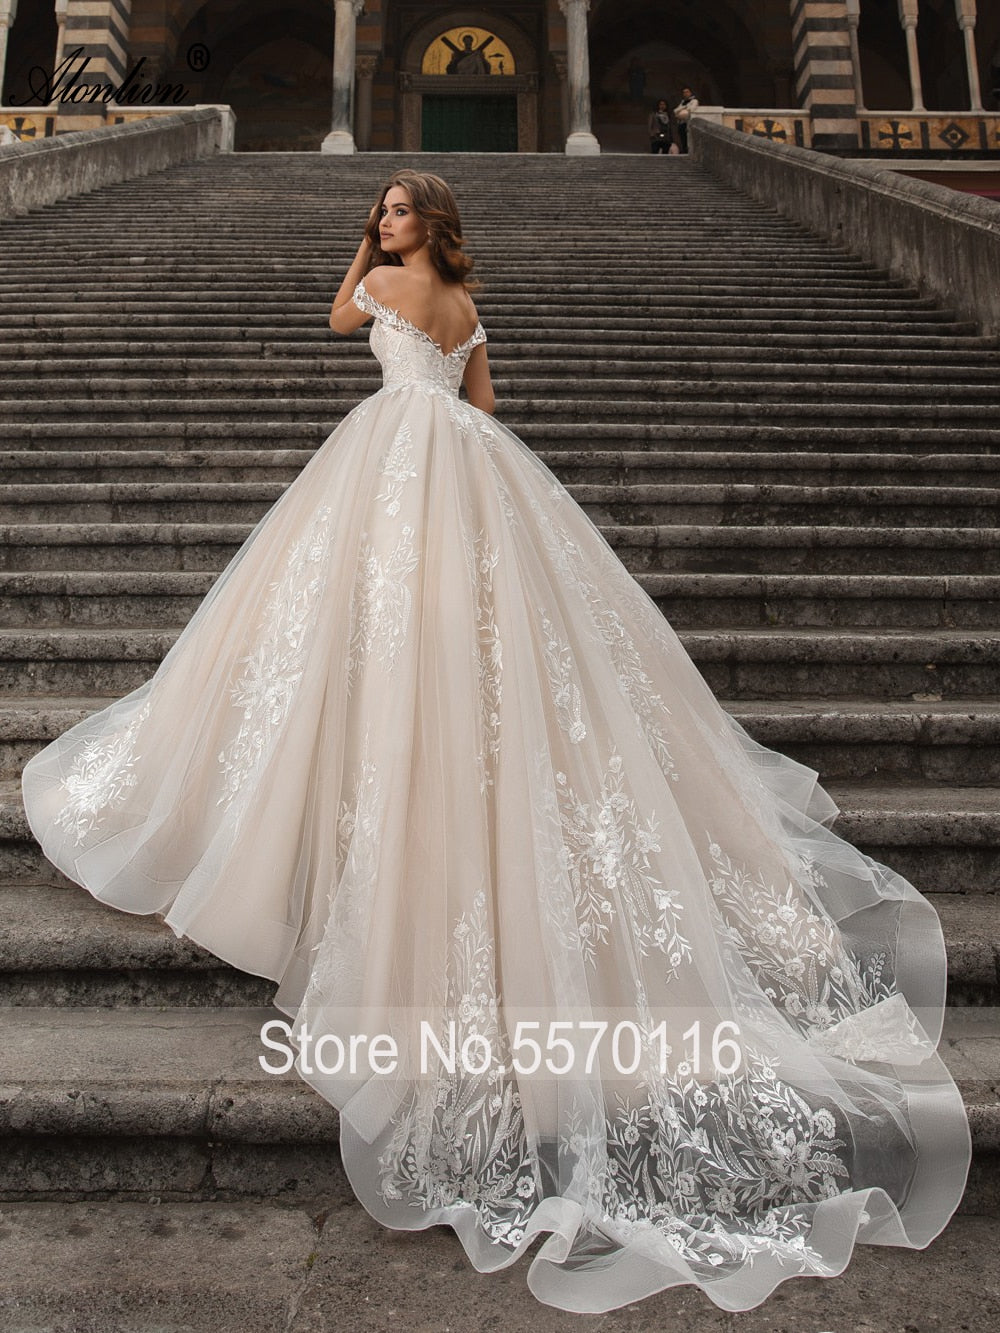 Vizcaya by Morilee Dress 89335 | Ball gowns, Pretty quinceanera dresses,  Quinceanera themes dresses